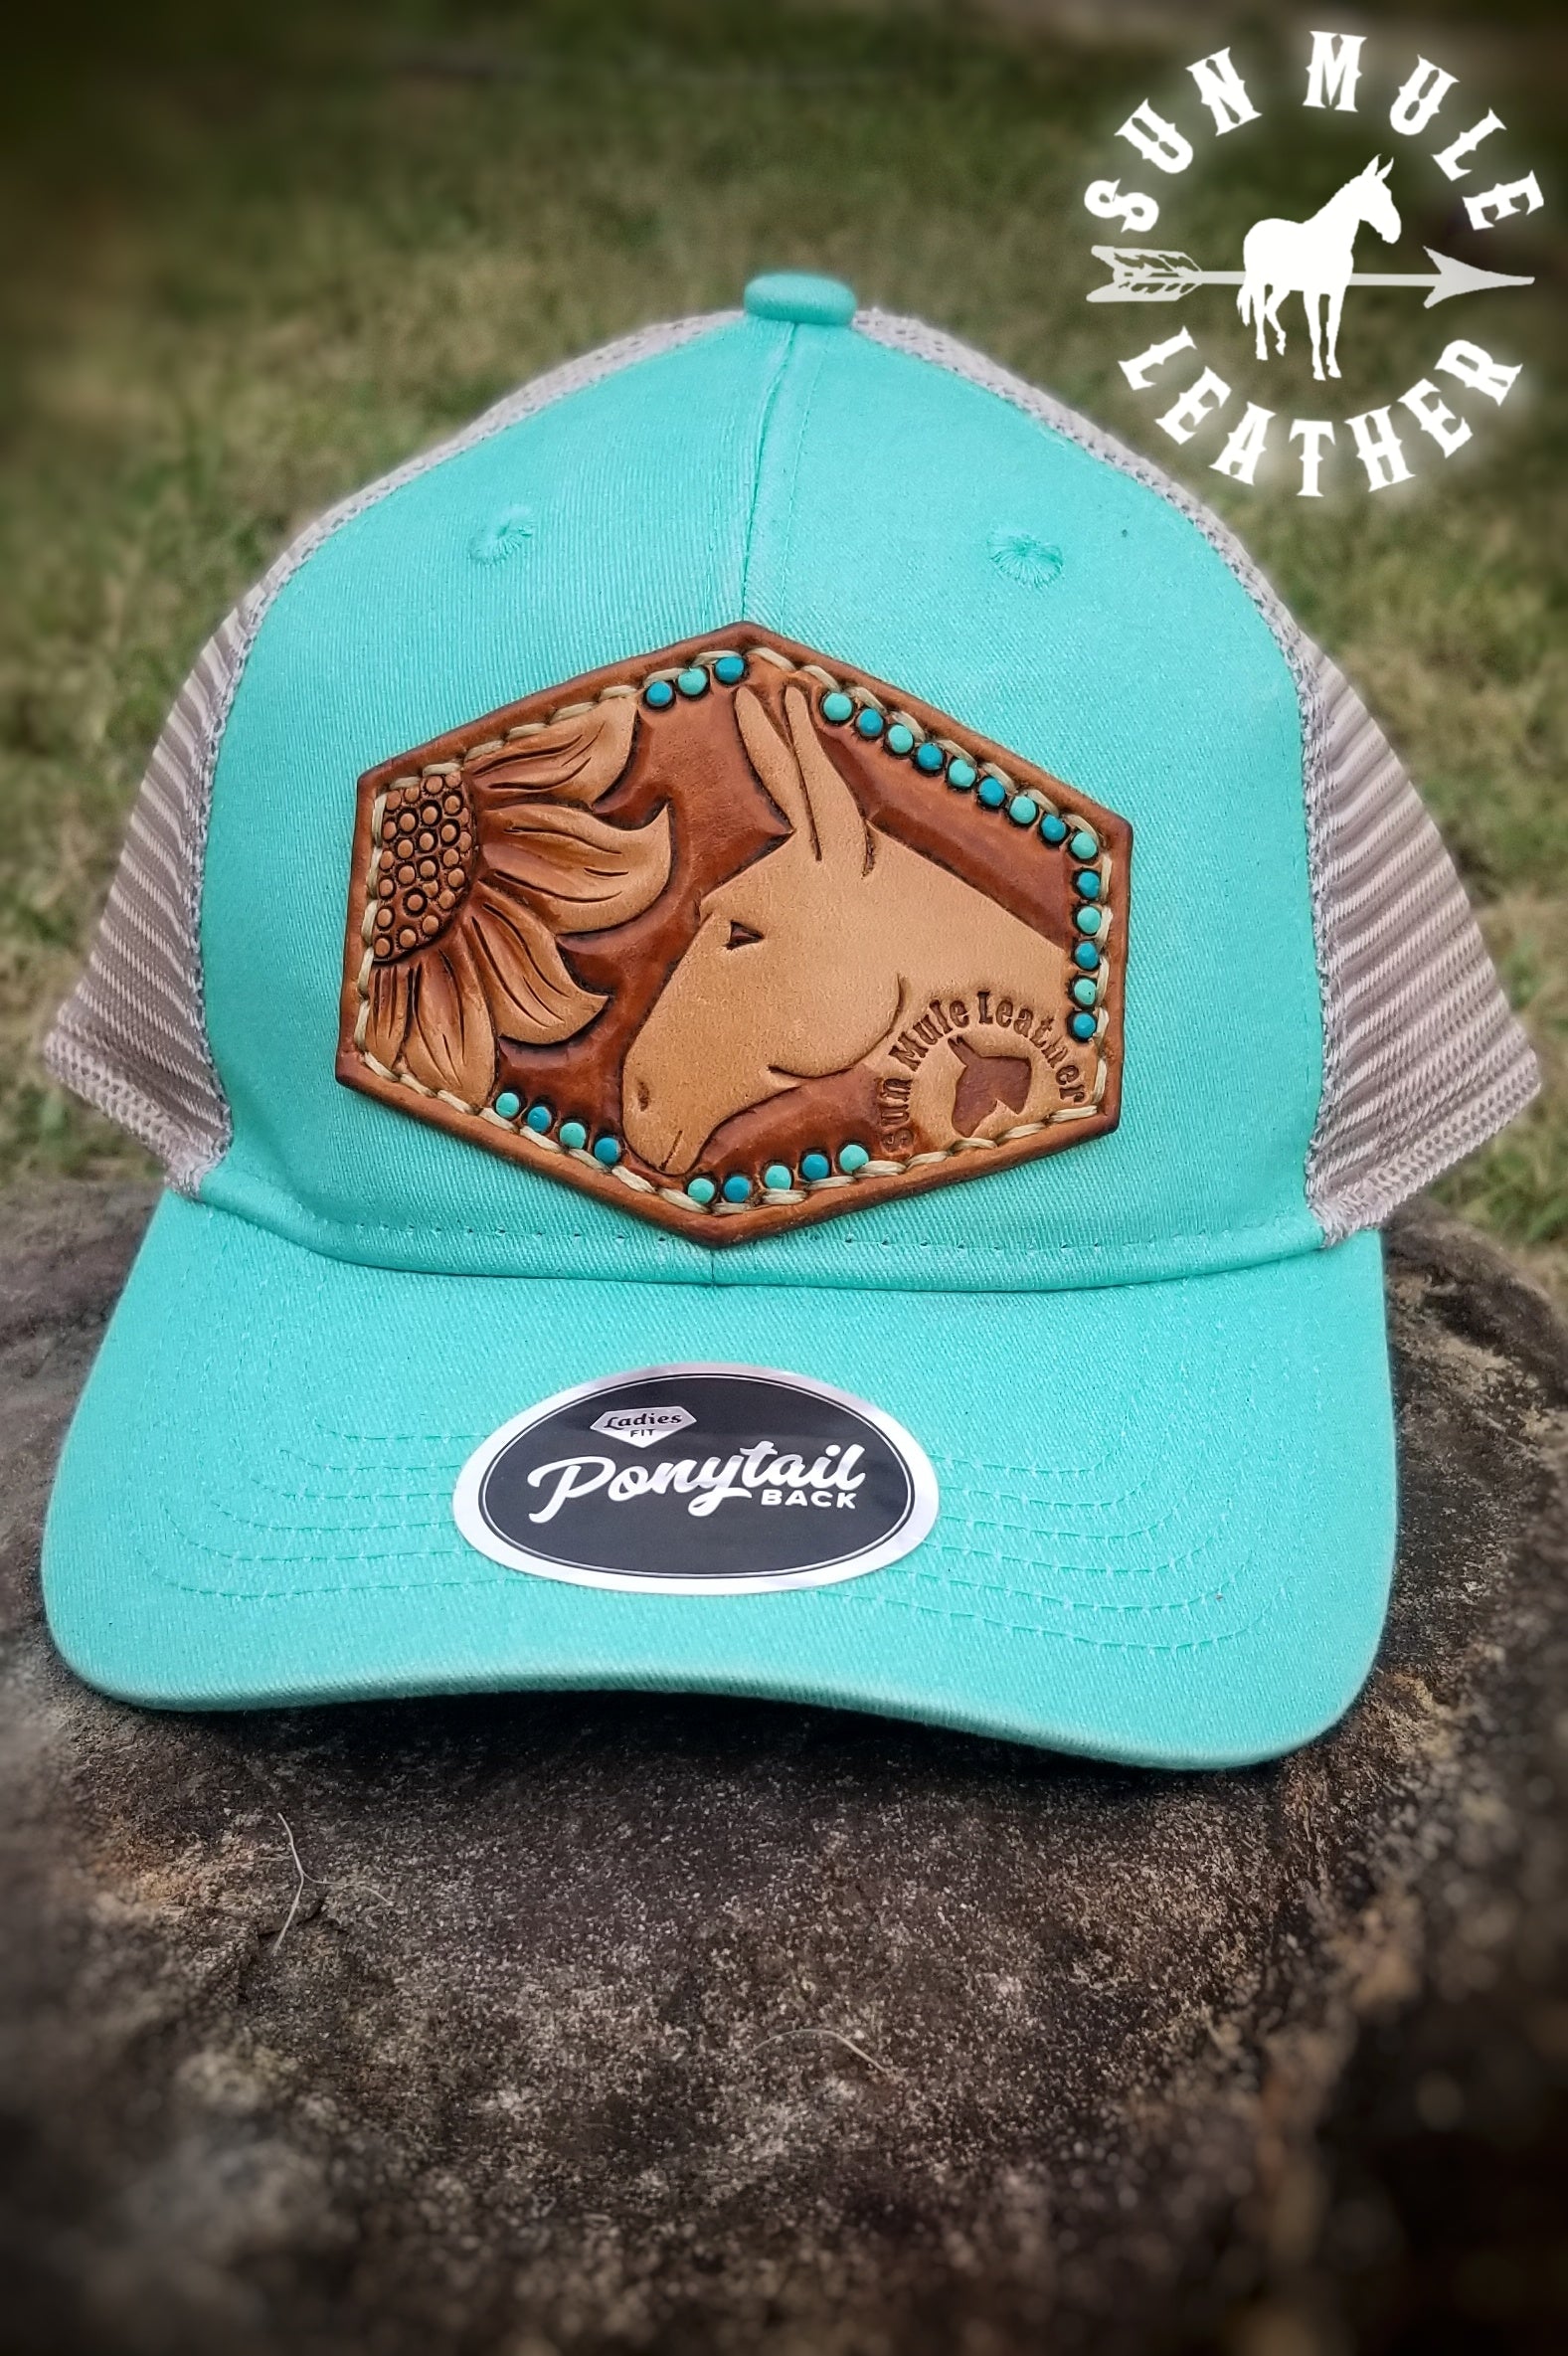 Sun Mule Leather handtooled mule hat patch, handsewn to ponytail mint colored structured hat.